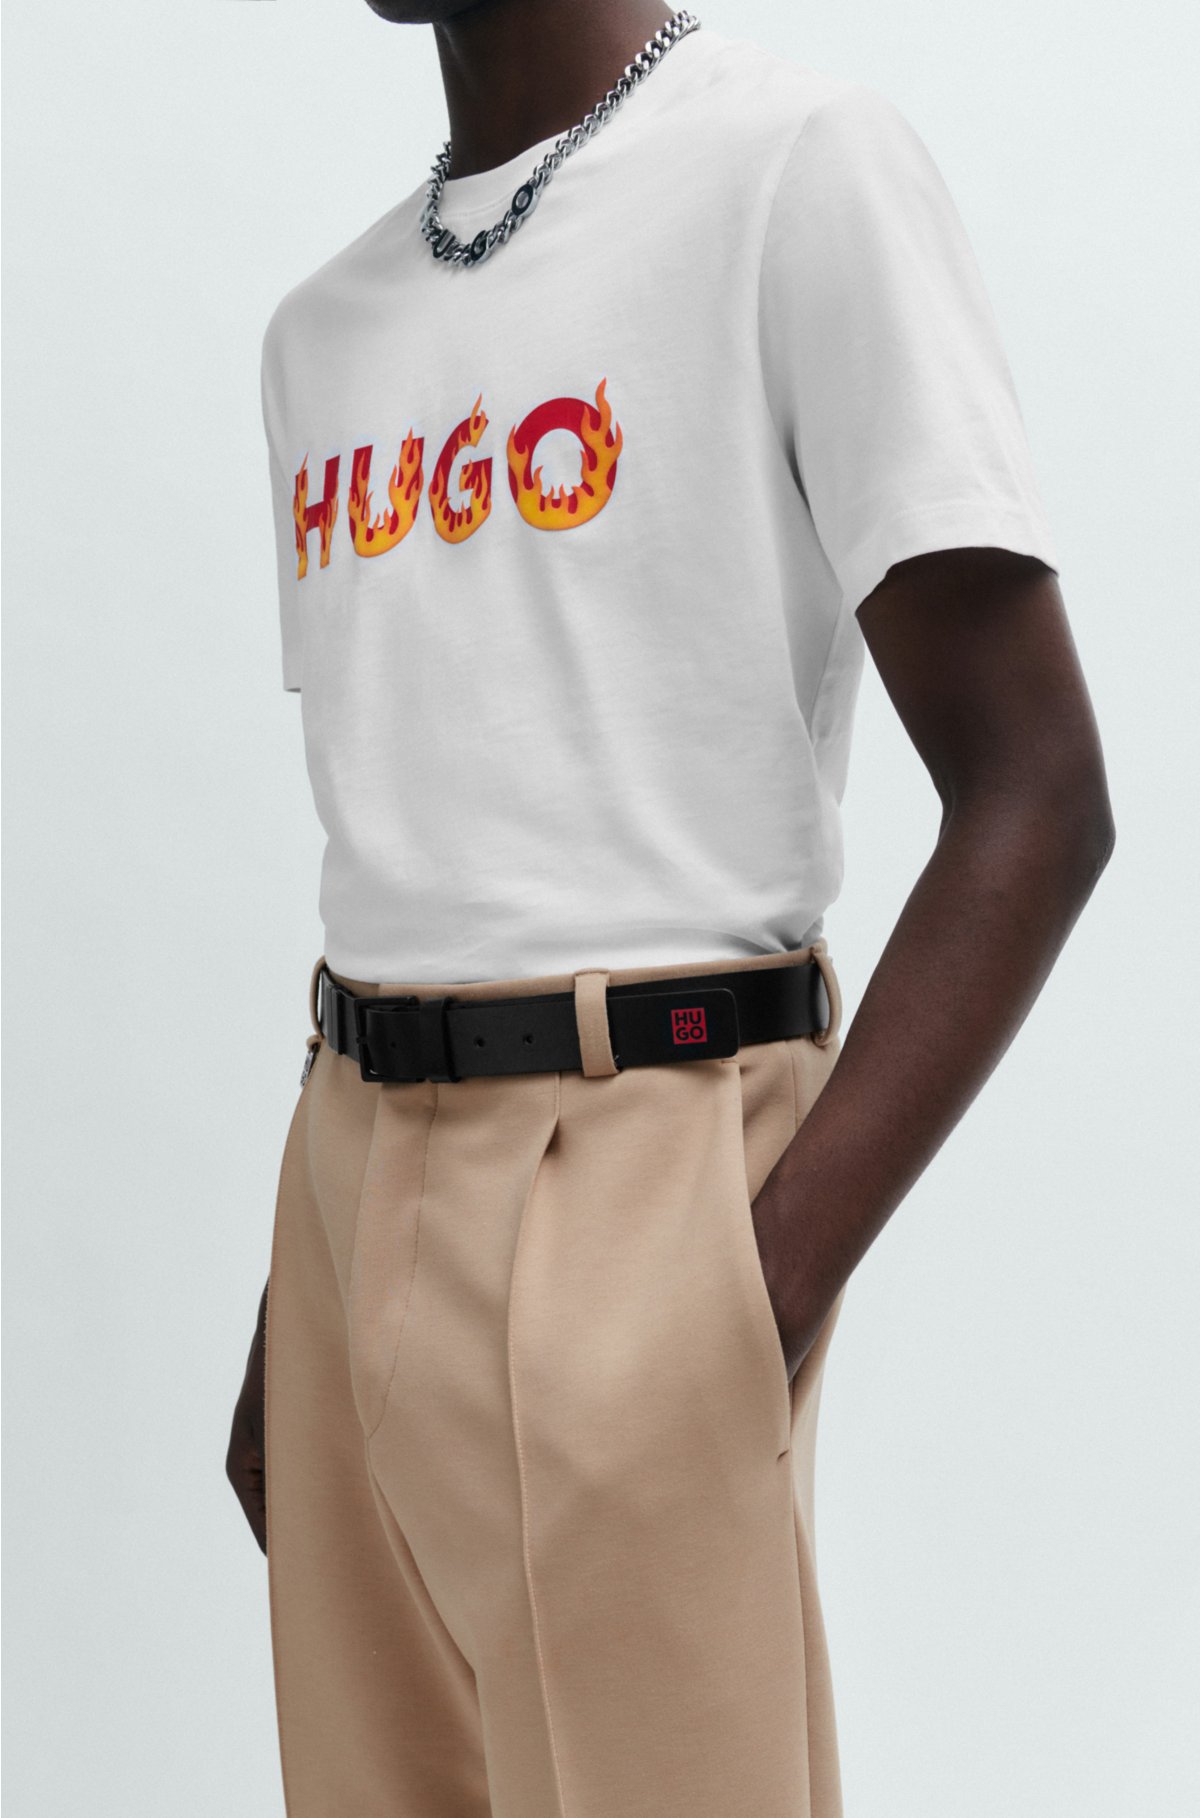 stacked with HUGO logo and belt Reversible - flames Italian-leather